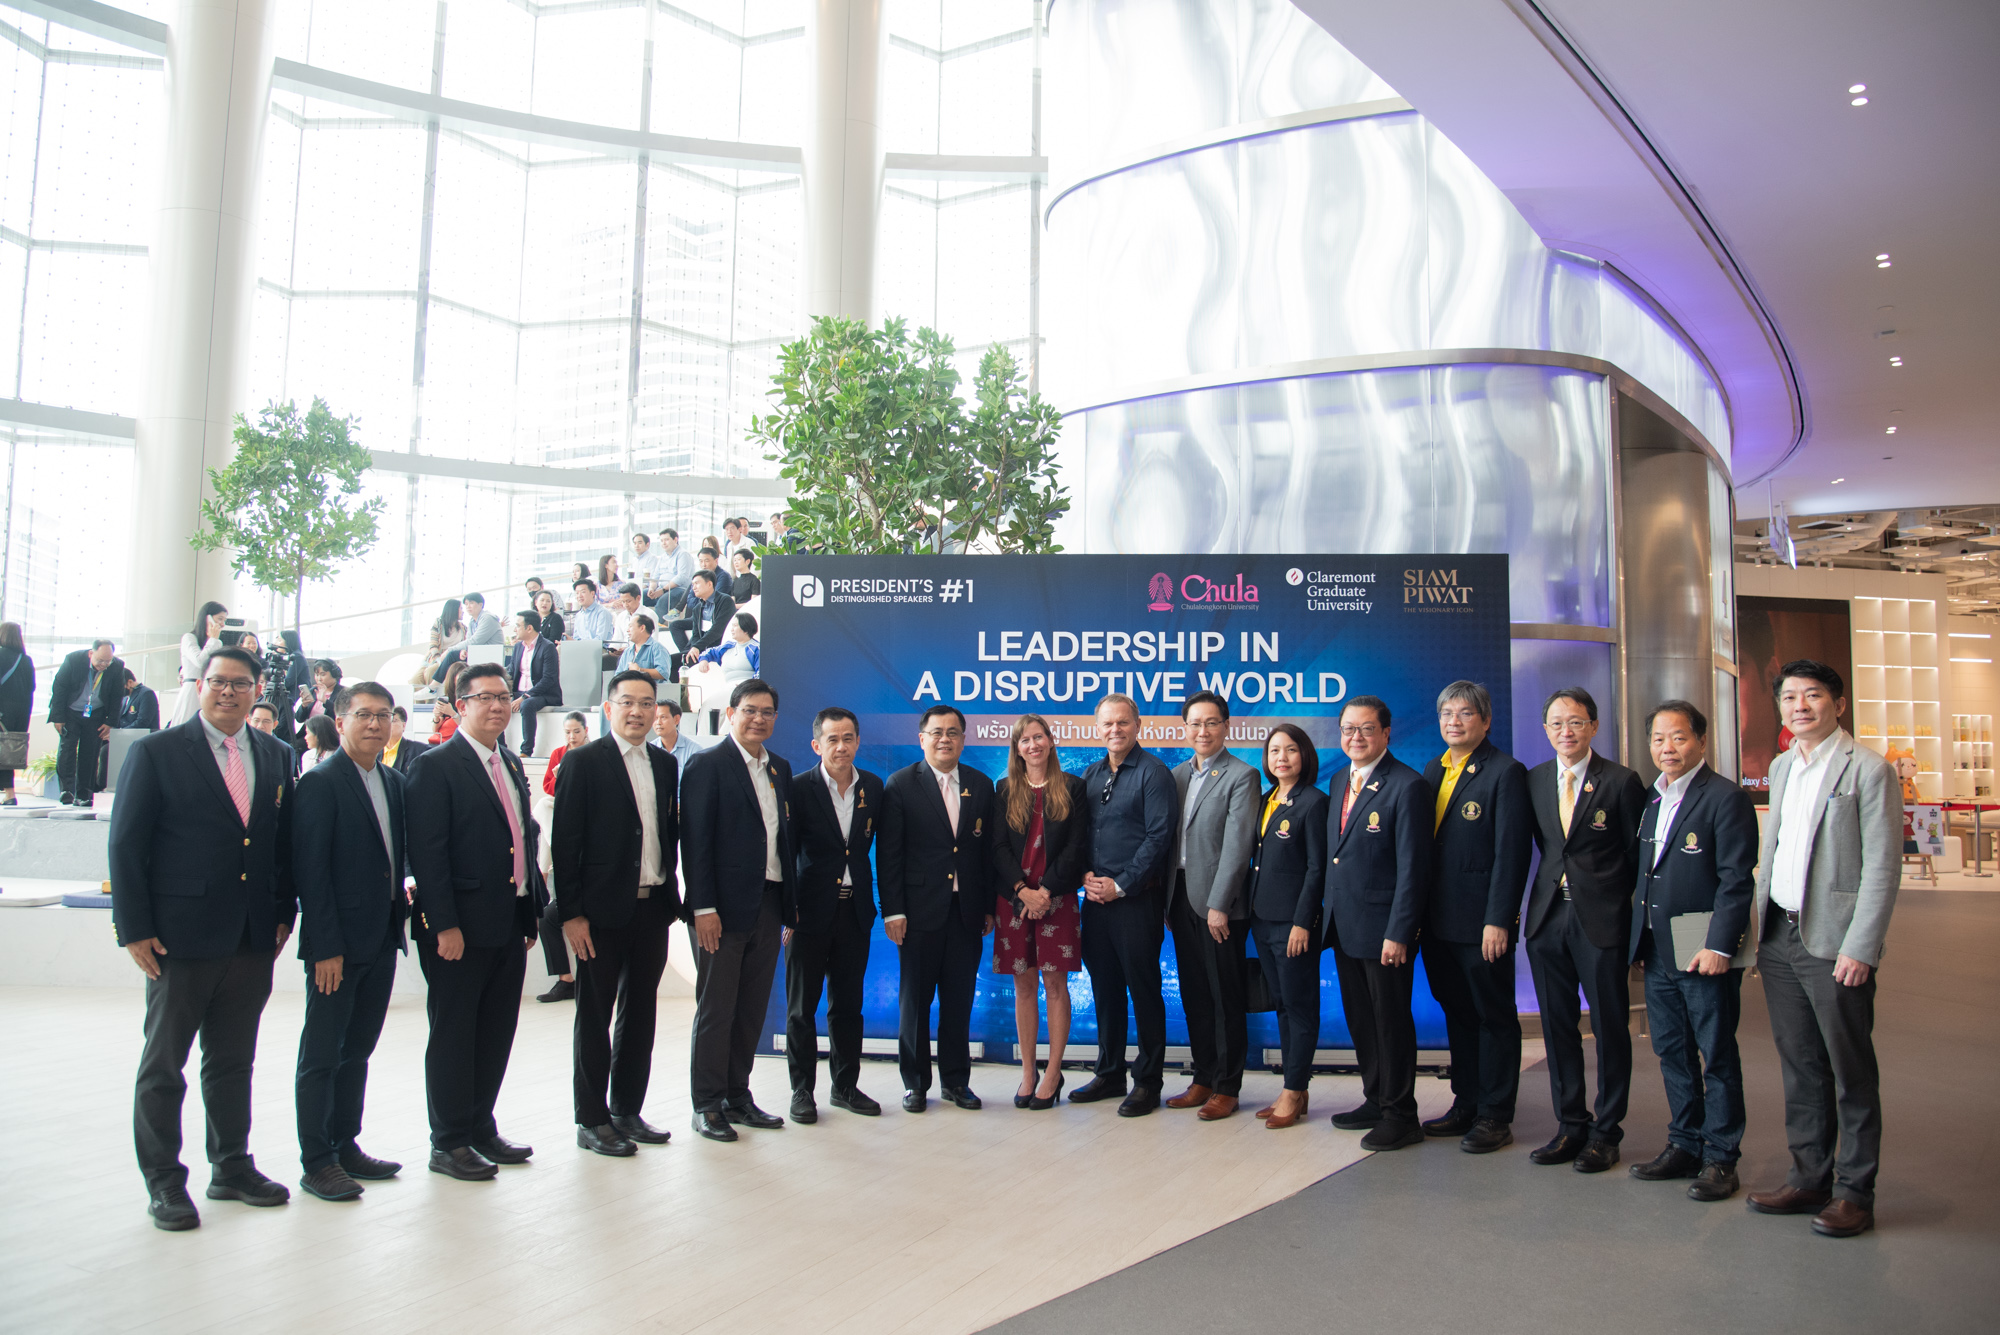 Chulalongkorn University Organizes the 1st Chulalongkorn University President’s Distinguished Speakers on “Leadership in a Disruptive World,” Joined by Executive Vice President and Provost from Claremont Graduate University